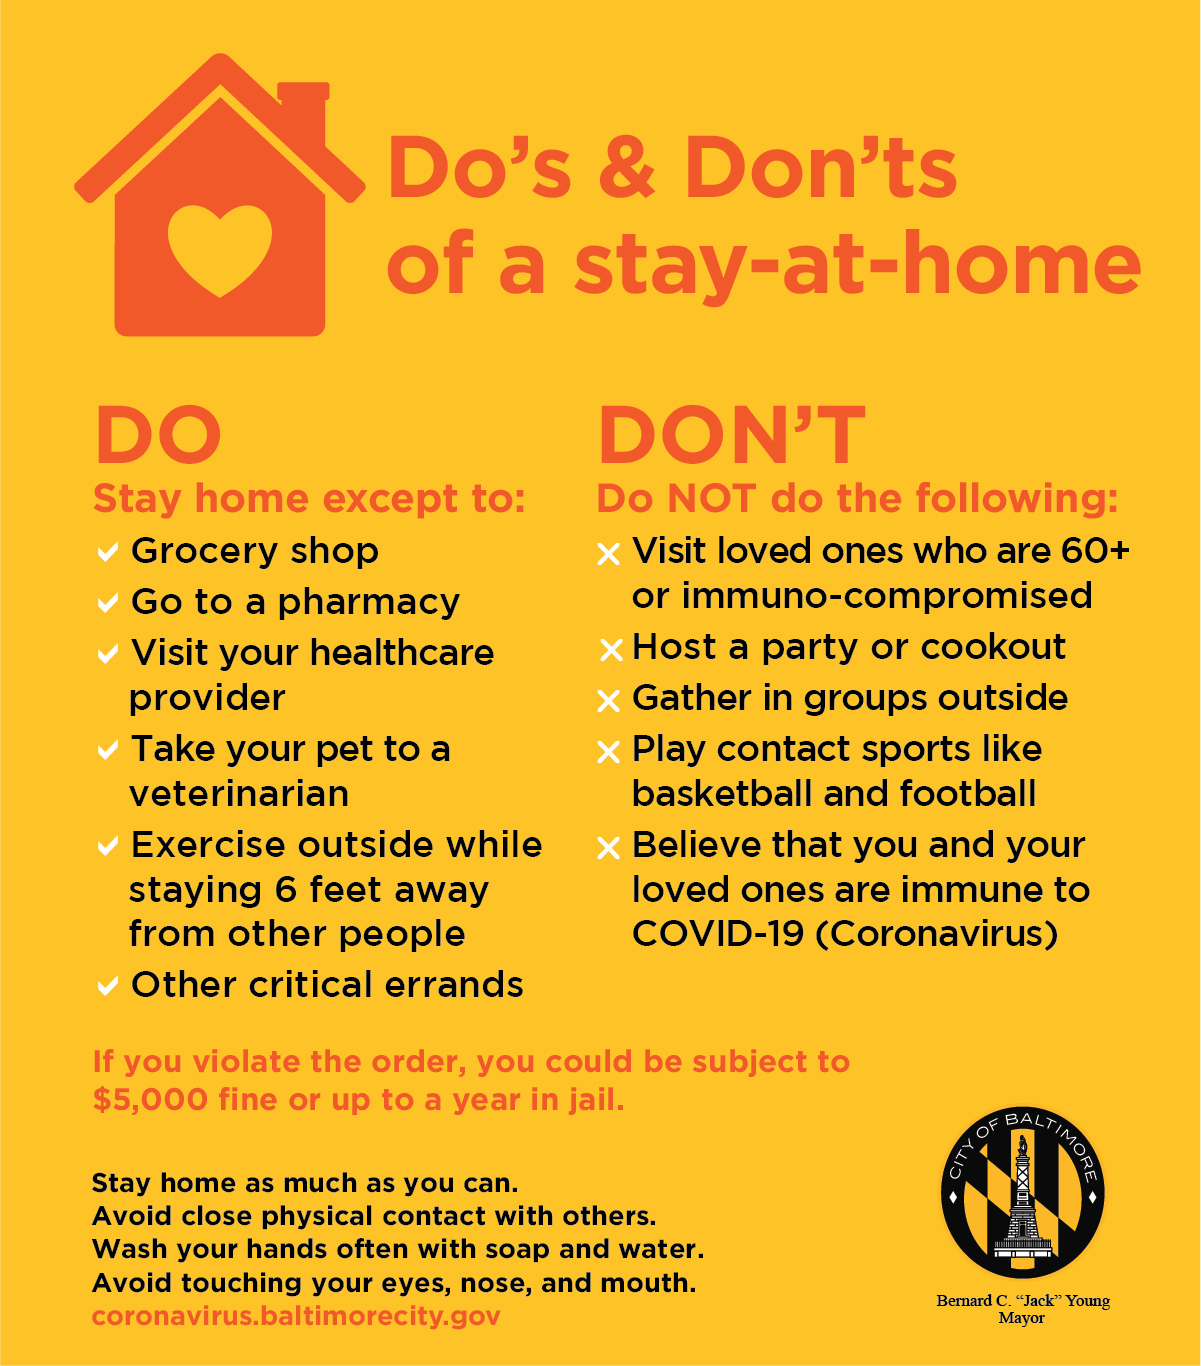 The Stay at Home order asks residents to stay home unless for an essential reason